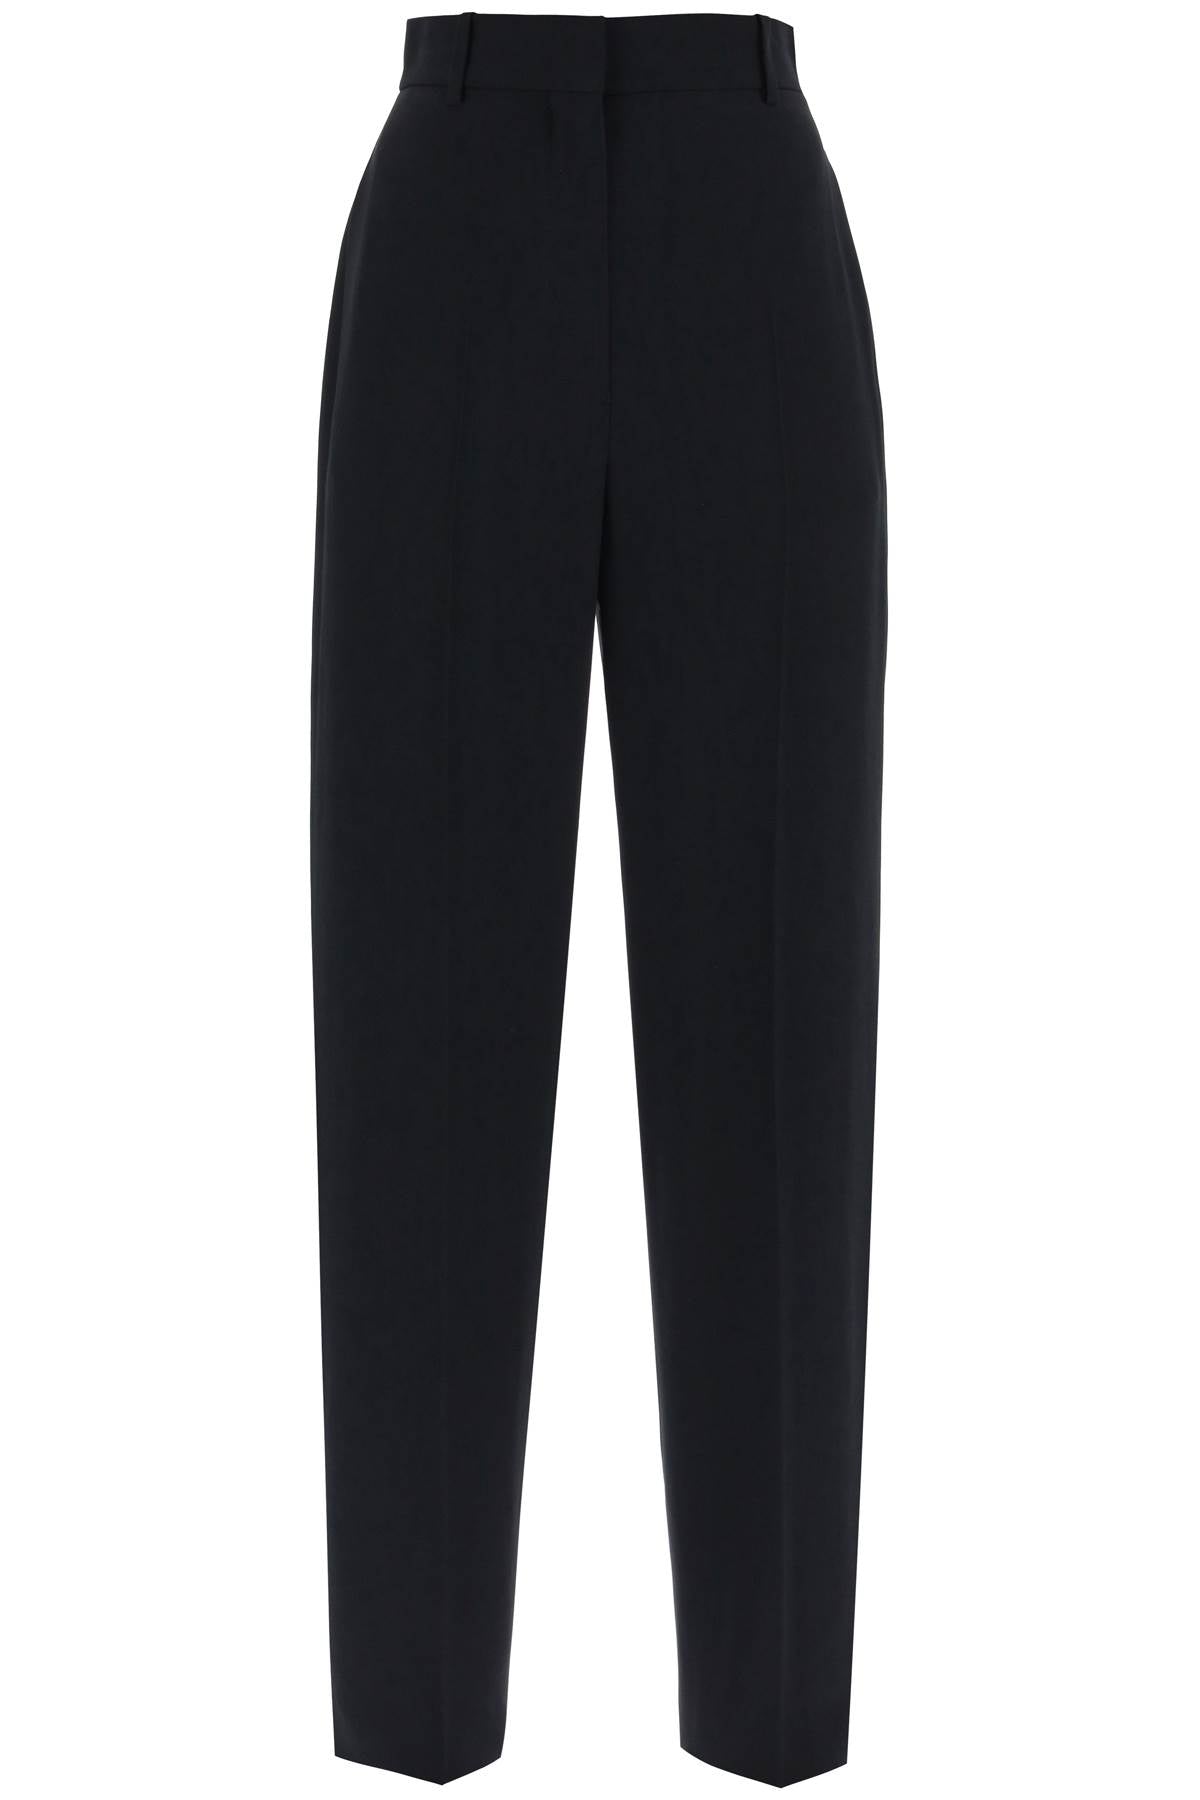 Shop Alexander Mcqueen High-waisted Fluid Crepe Trousers For Women In Black